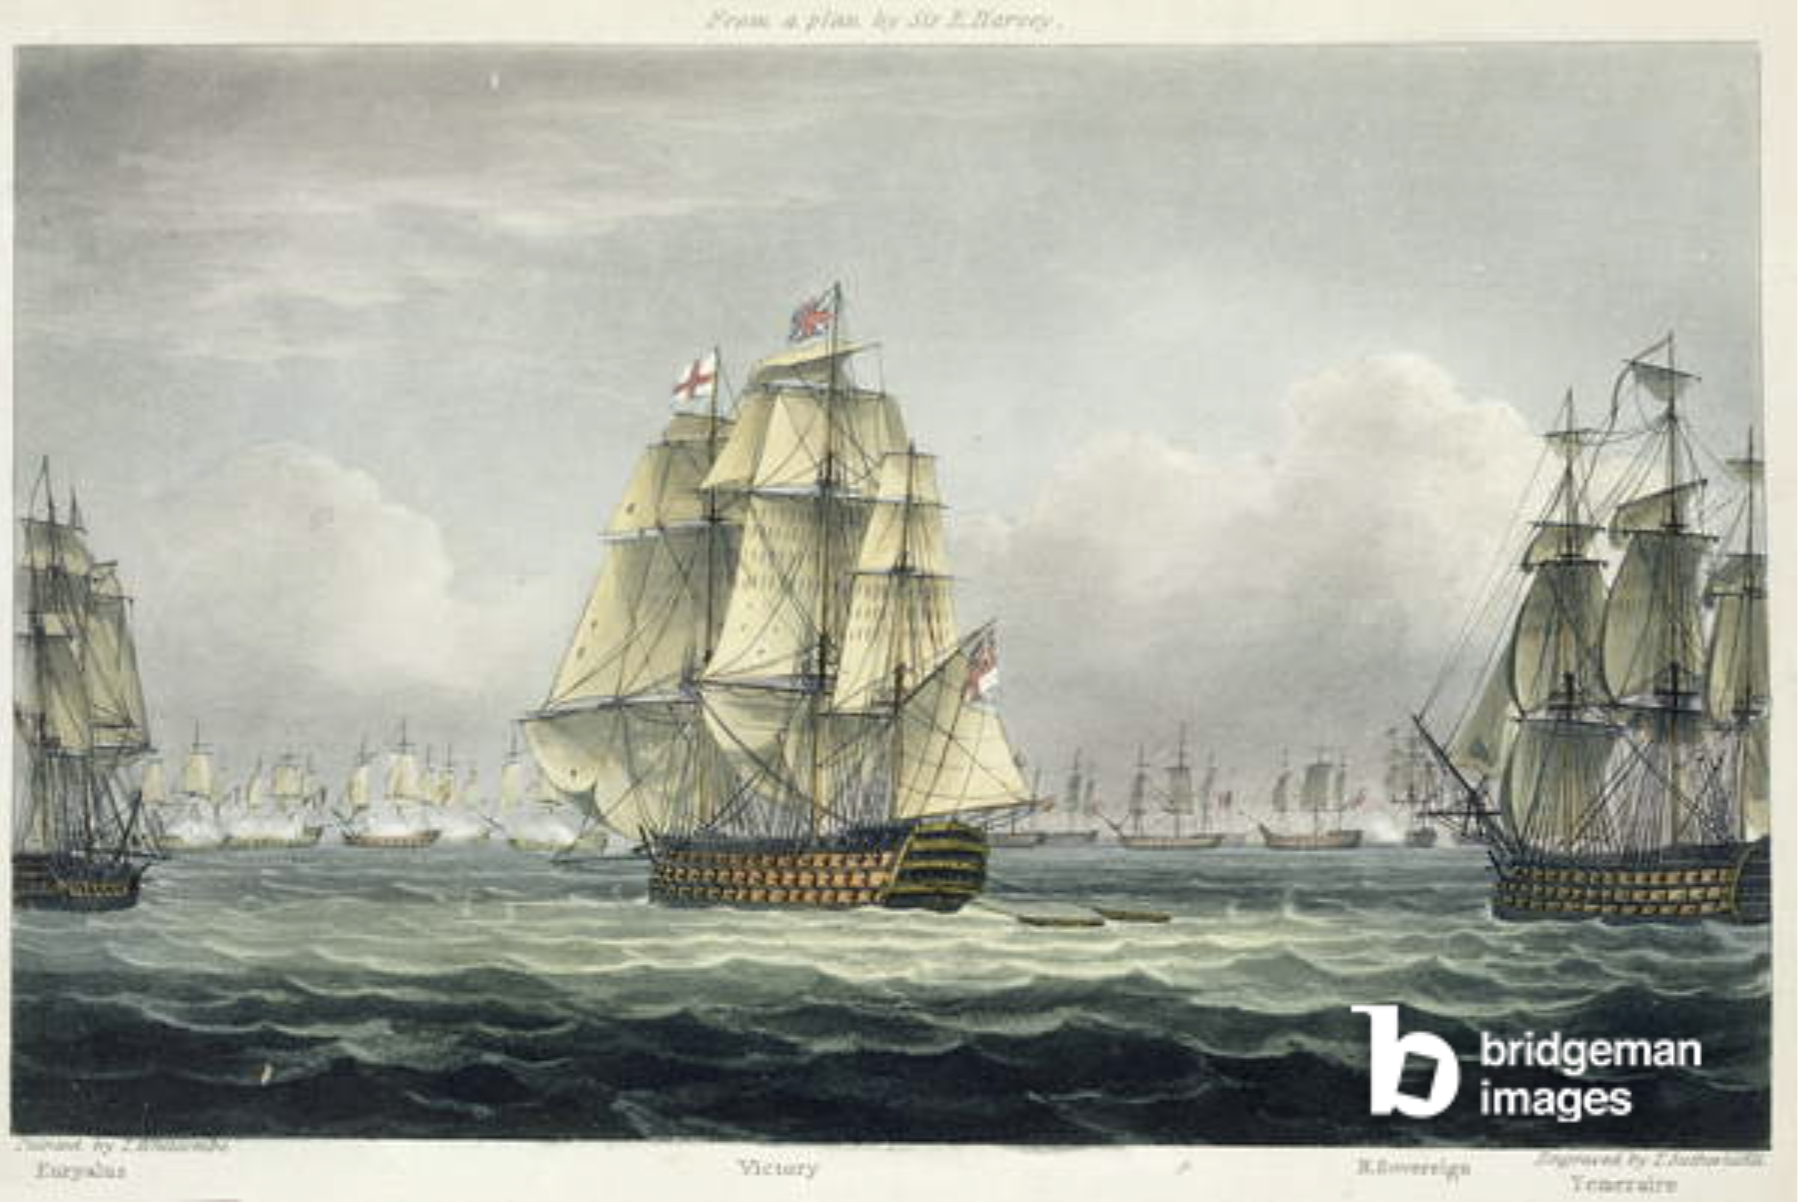 HMS Victory sailing for the French line flanked by the Euryalus and HMS Temeraire at the Battle of Trafalgar, October 21st, 1805, engraved by T. Sutherland for 'The Naval Chronology of Great Britain' by J. Ralfe, published 1820 (coloured engraving), Thomas Whitcombe, (c.1752-1824) (after) / Private Collection / The Stapleton Collection / Bridgeman Images